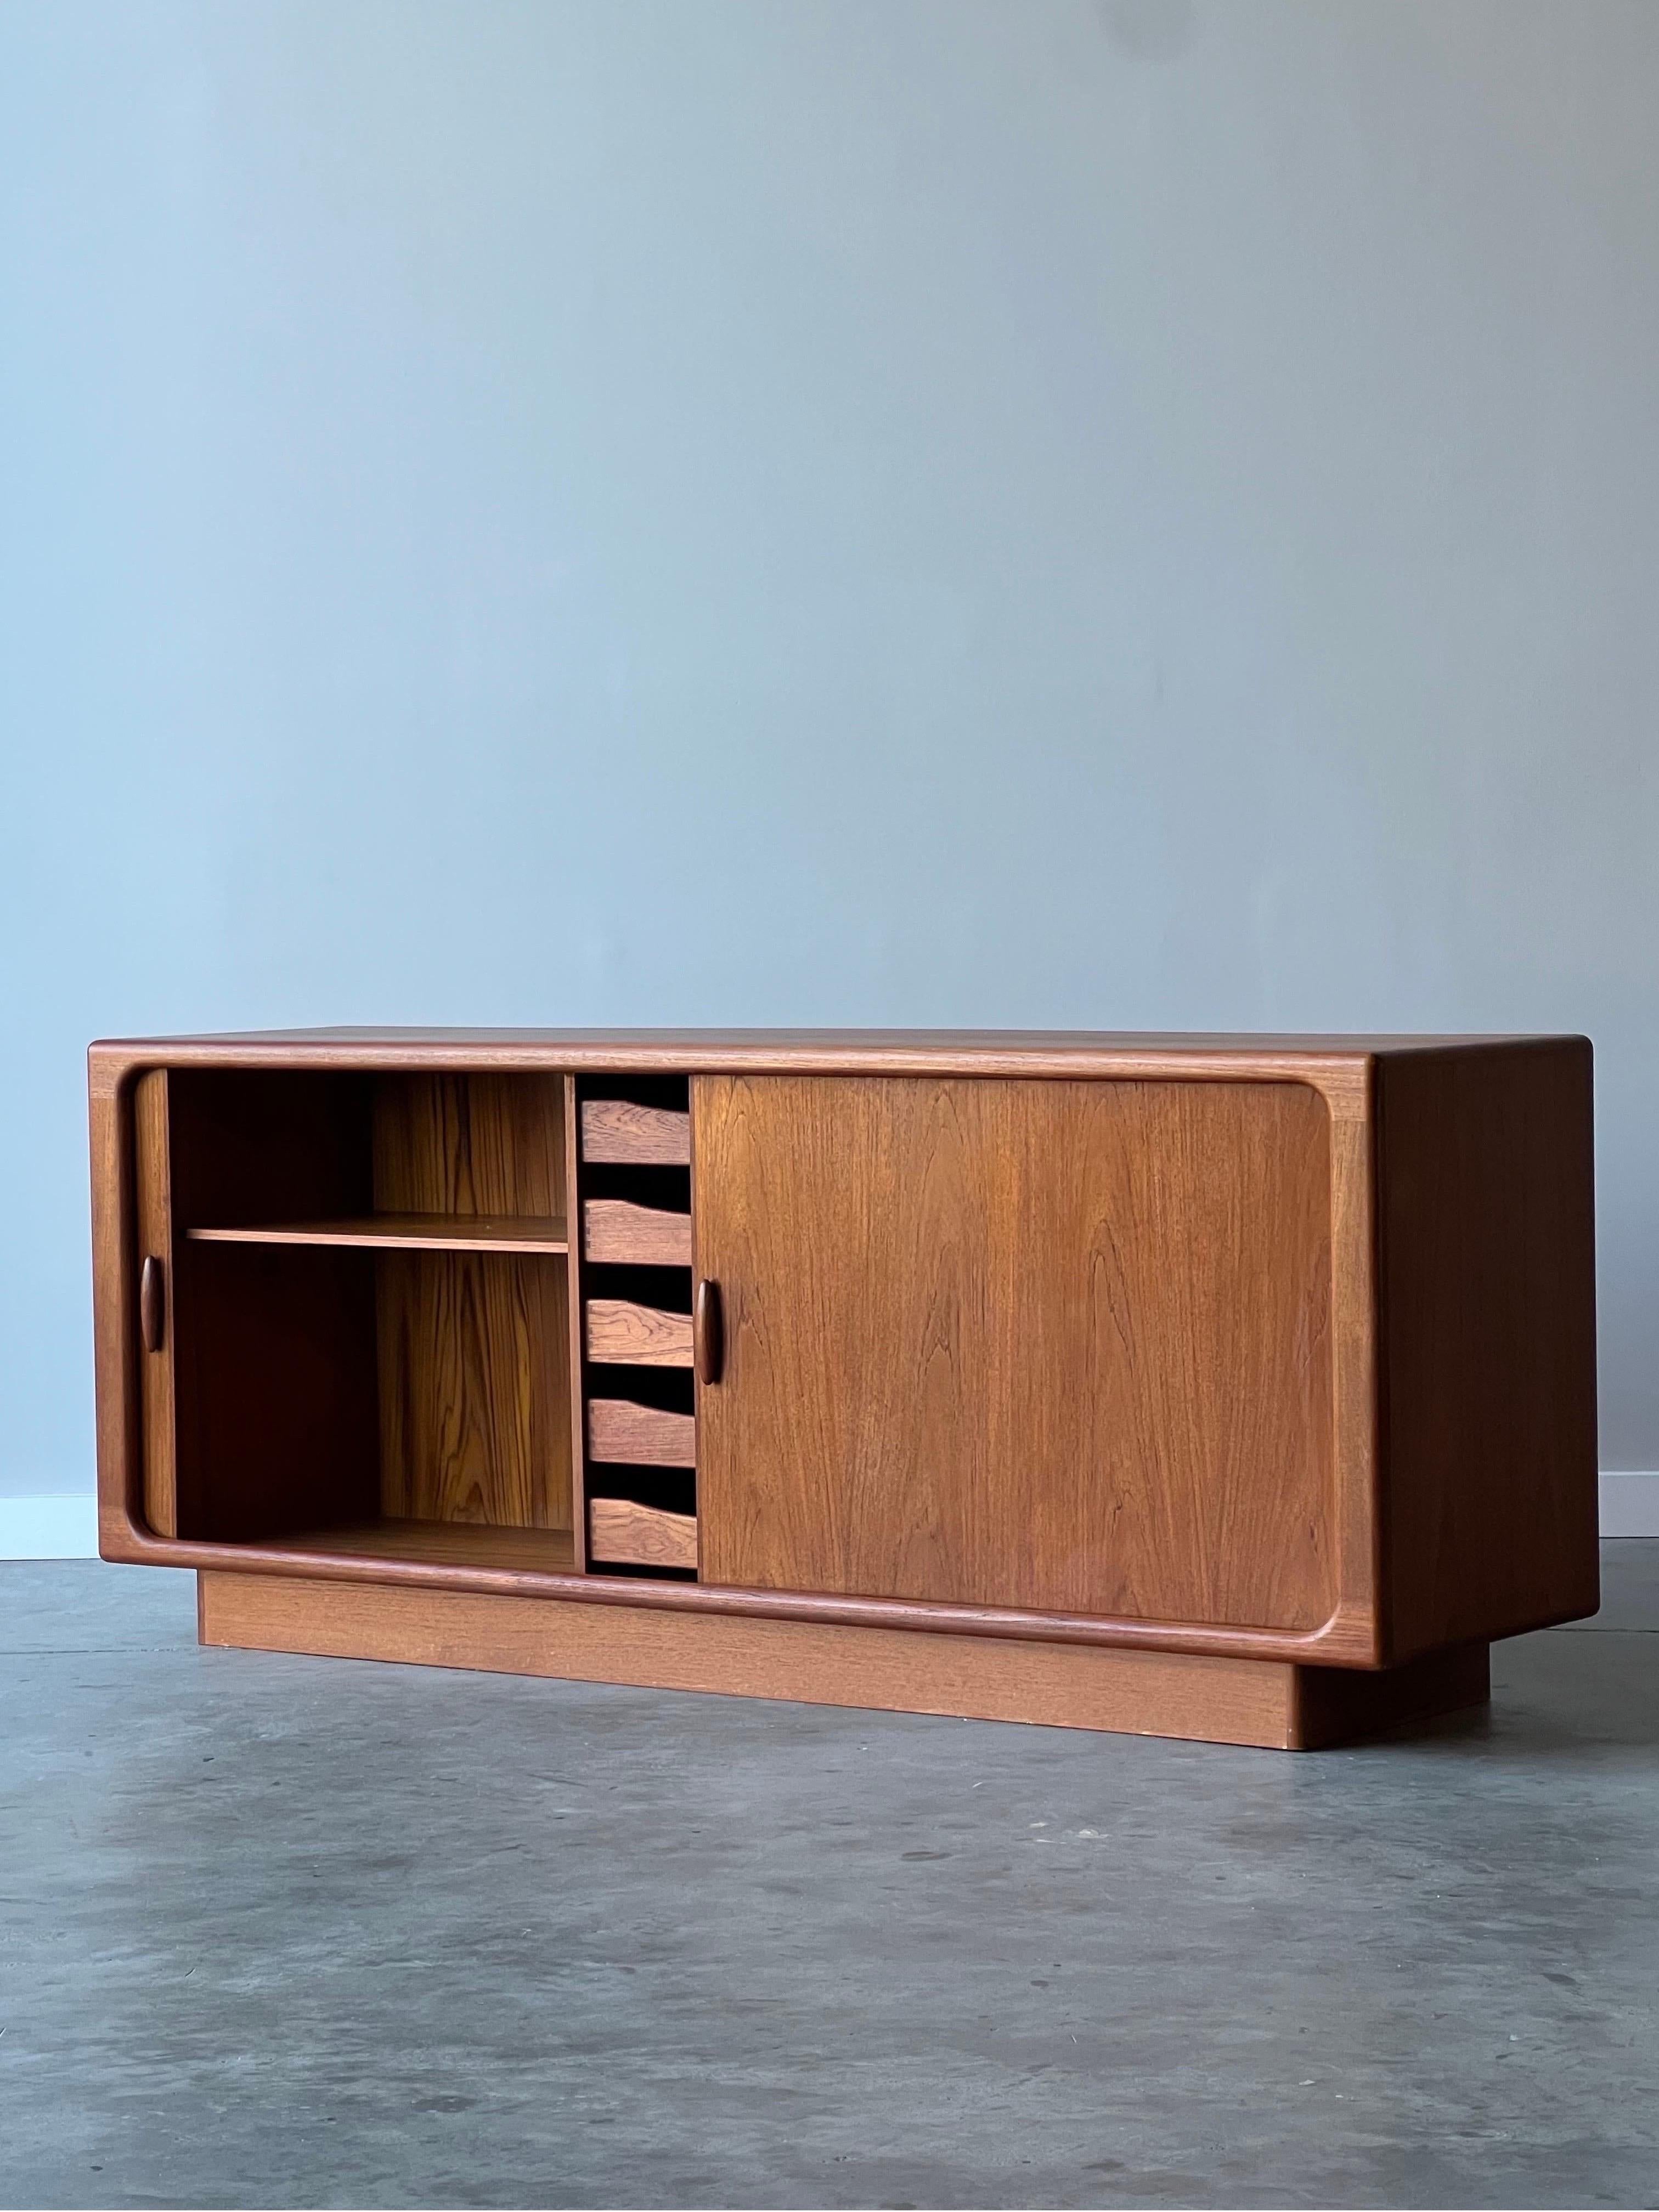 Happy to offer this wonderful 1960’s Danish teak credenza by Dyrlund. Bursting with character and sleek design. Plenty of adjustable storage space and superb sliding tambour doors. Nice rounded features and robust teak grain throughout. Sculptural